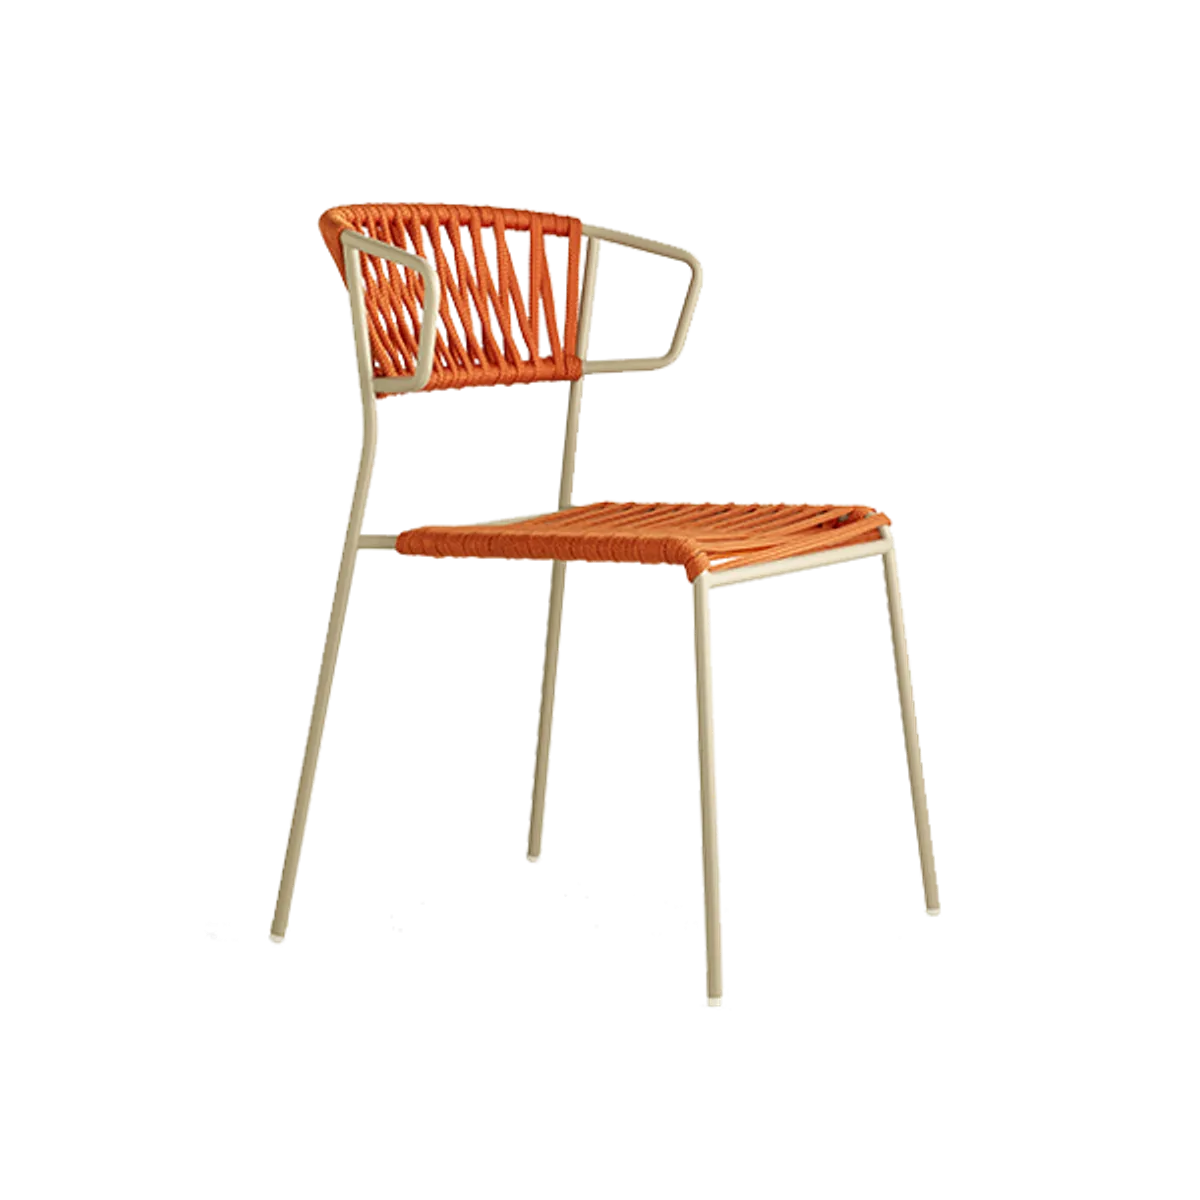 Web Robyn Weave Chair Outdoor Hospitality Furniture Insideoutcontracts Orange 080